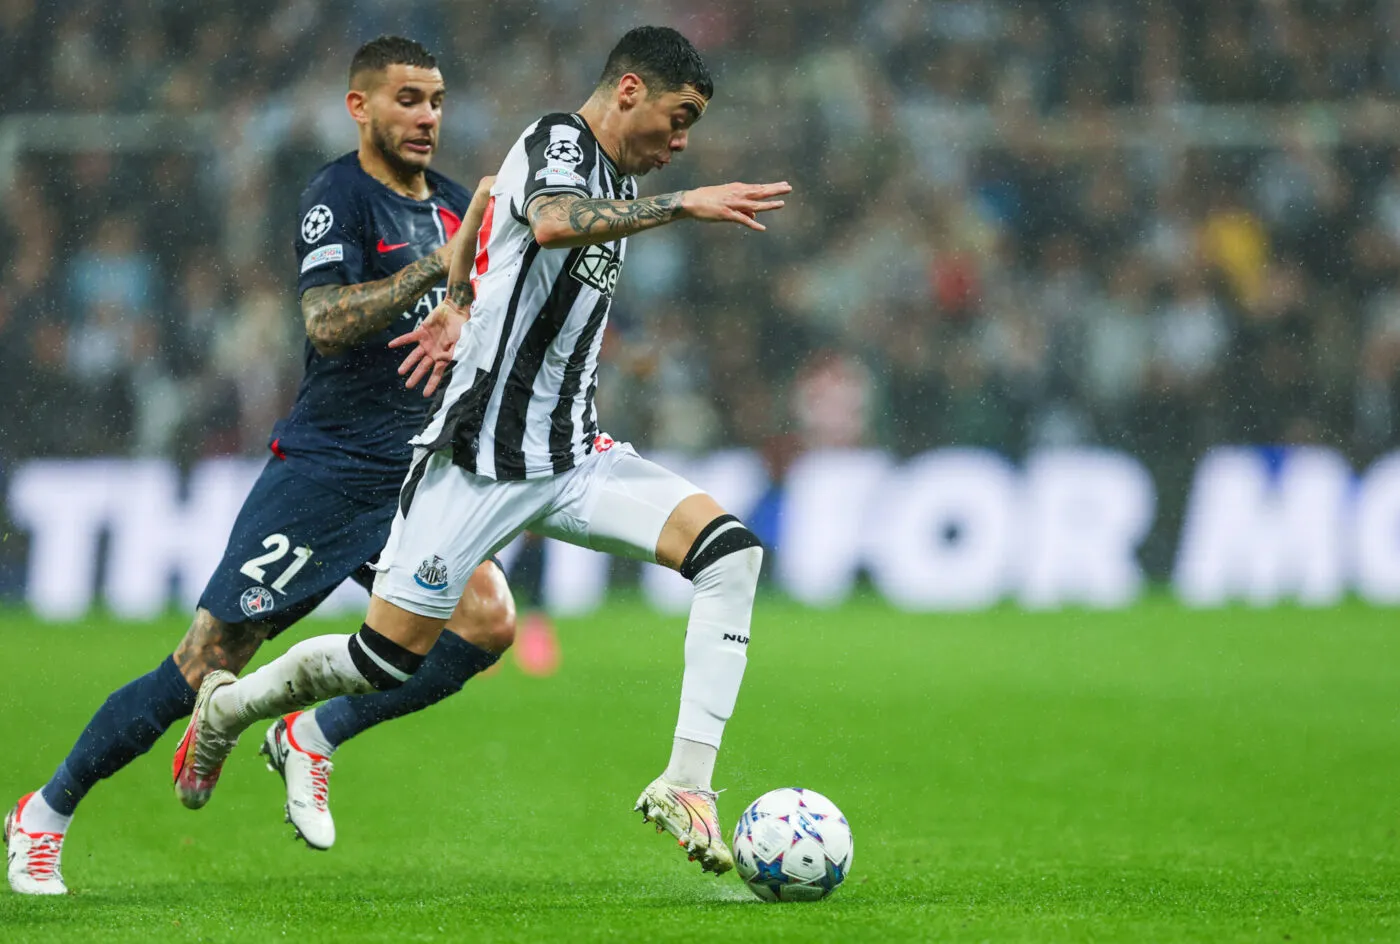 Miguel Almirón of Newcastle United is chased down by Lucas Hernández of Paris Saint-Germain during the UEFA Champions League Group F match at St. James's Park, Newcastle